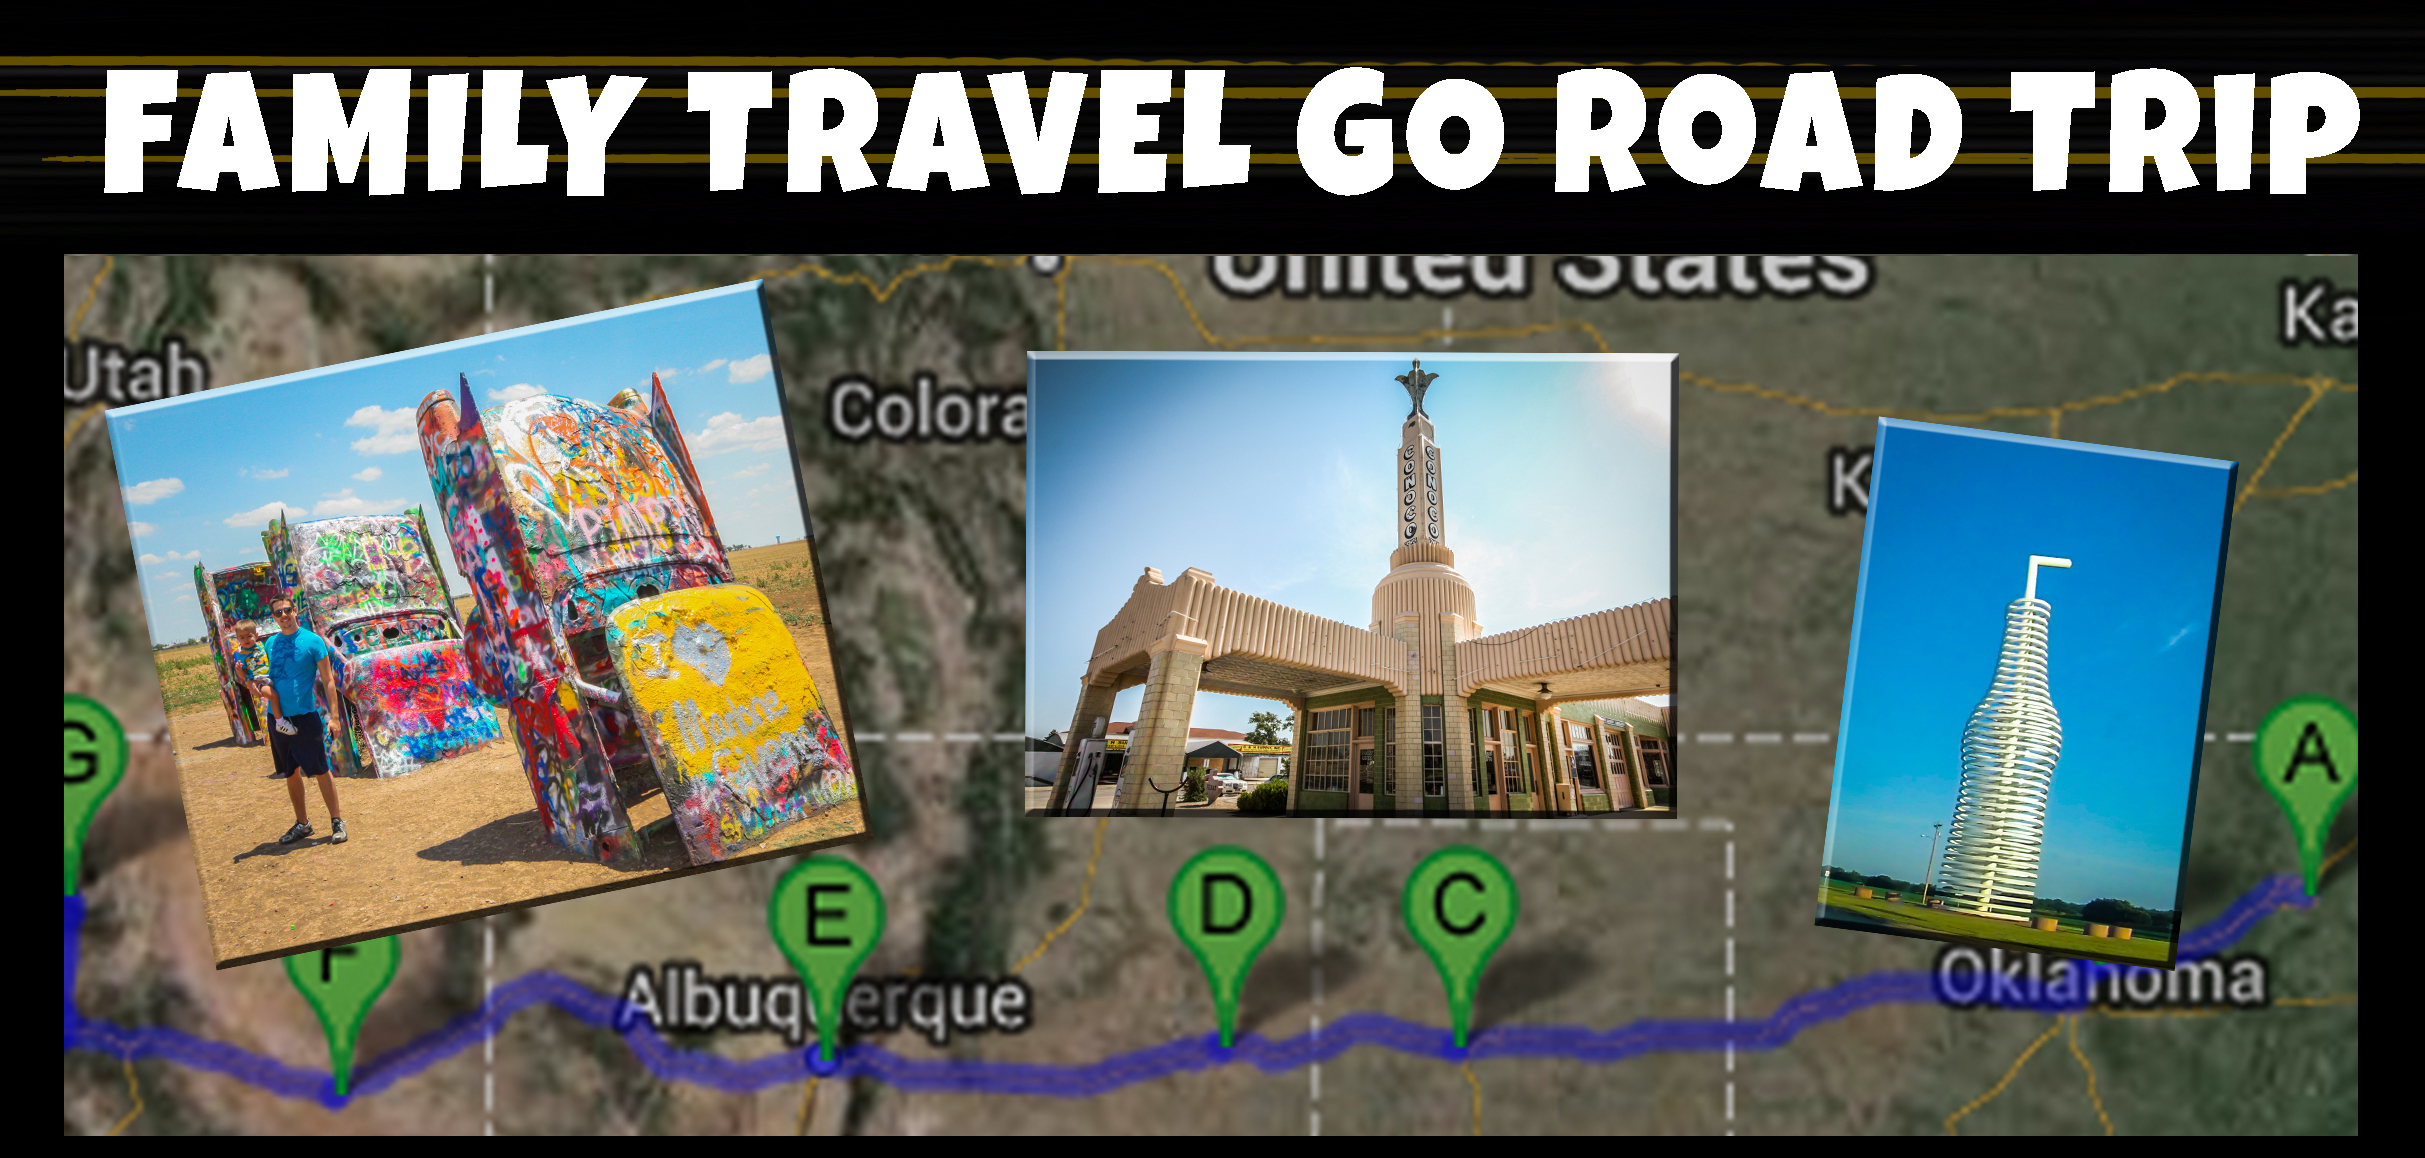 Part 1 of the West Route 66 Road Trip